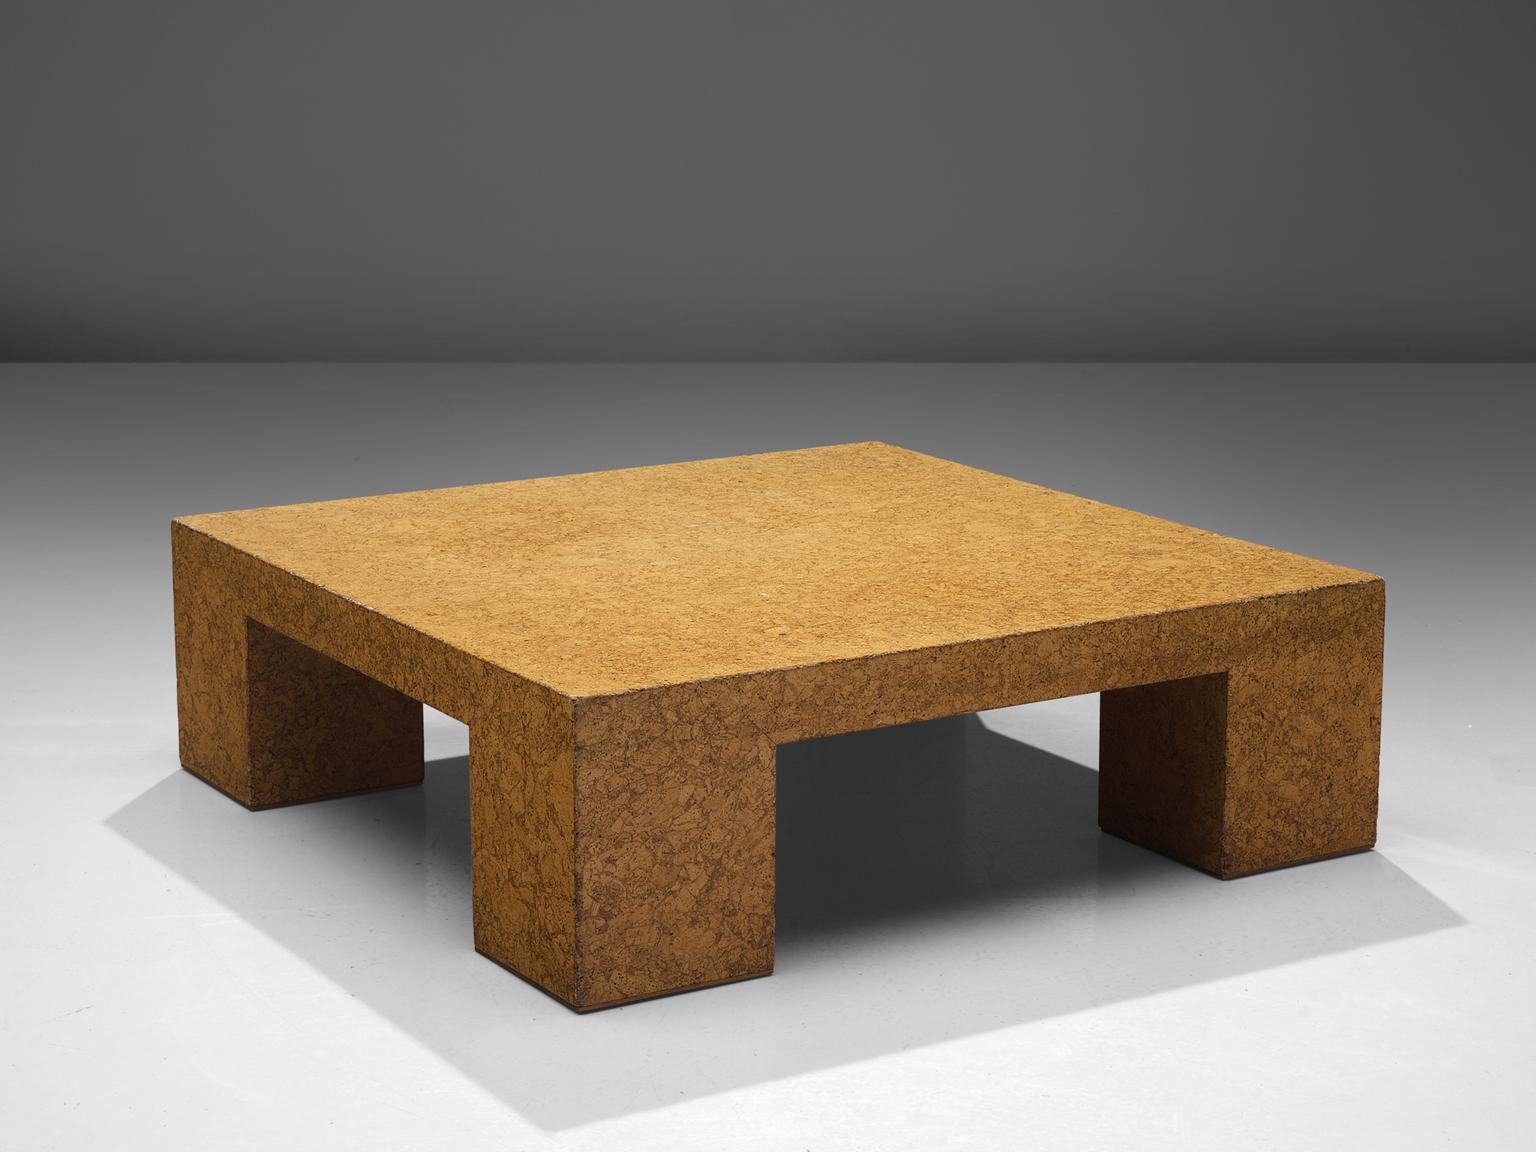 Jan De Smedt, side table, cork, Belgium, 1970s

This architectural table shows balanced proportions and great material choice of a warm, honey colored cork with patina. It is in the proportions that this table shows a certain sturdiness. The